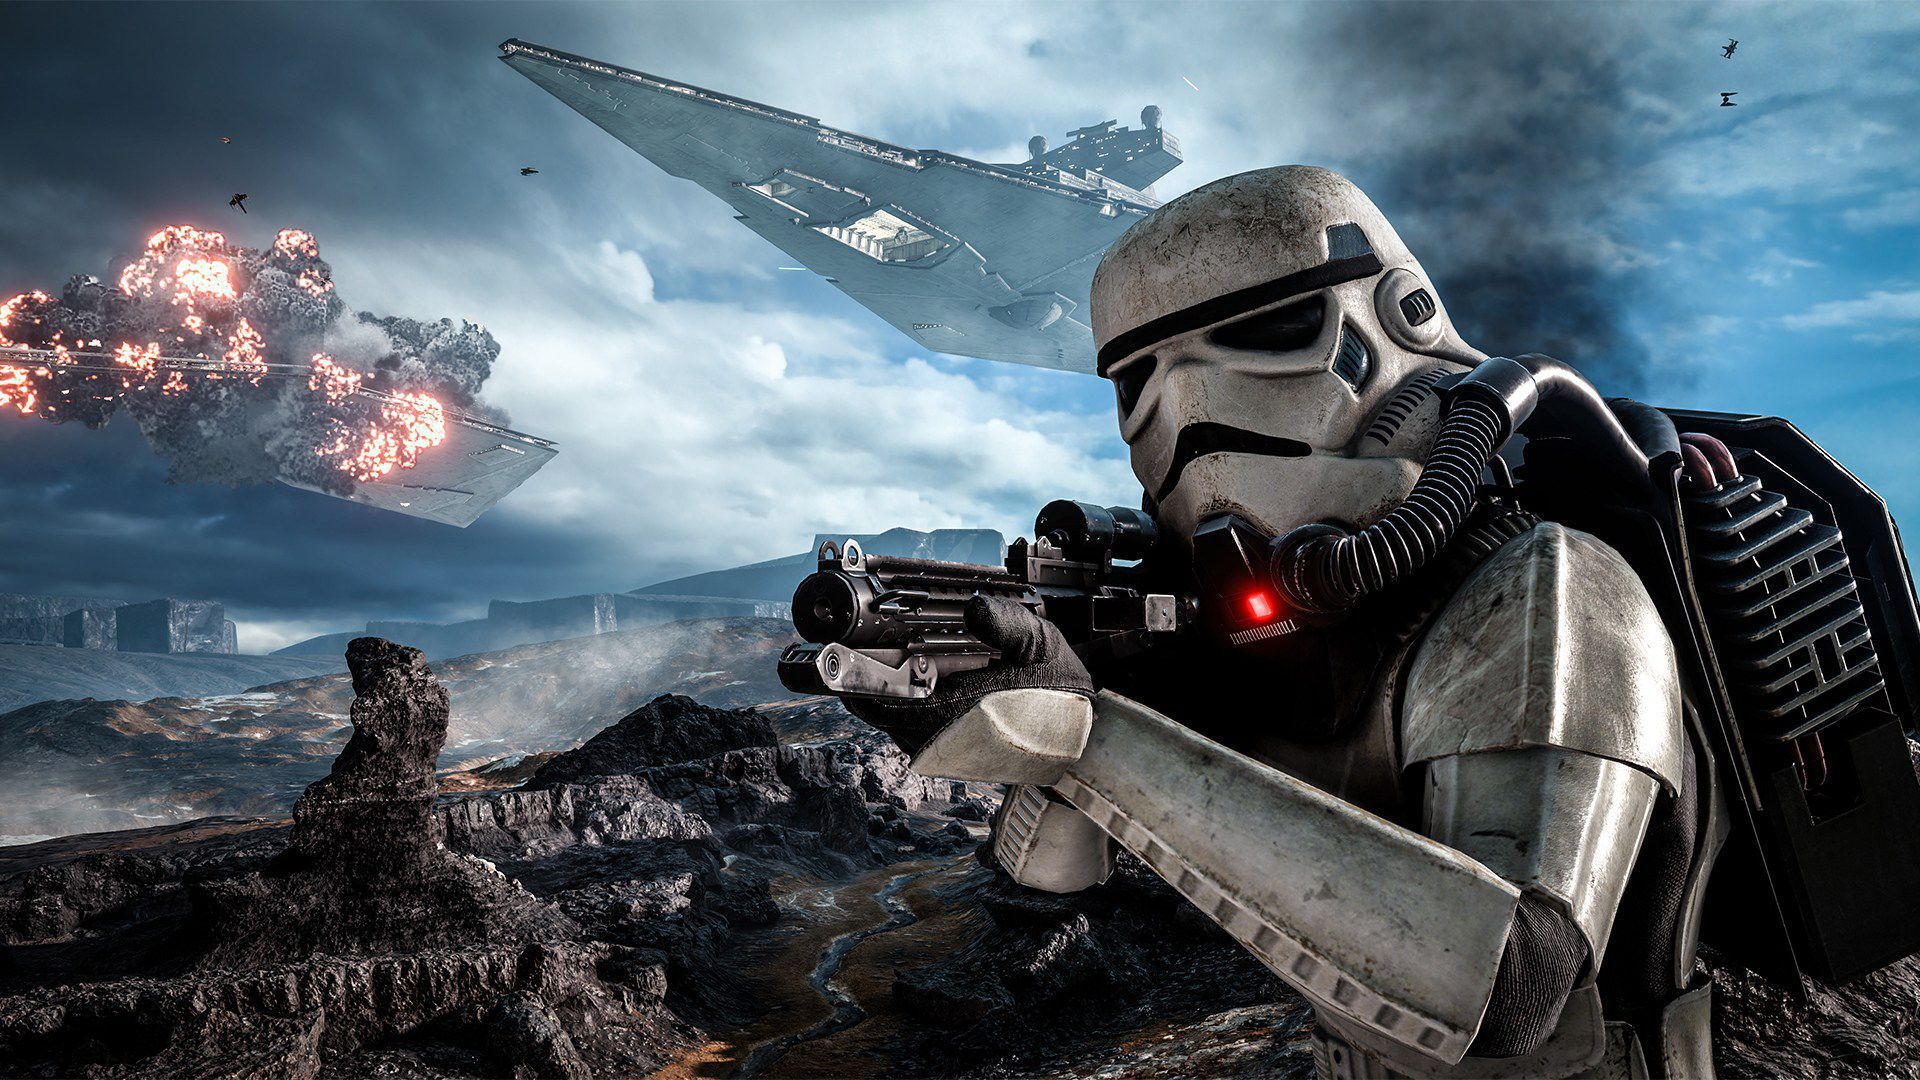 Amazing Star Wars Battlefront 2 Desktop Wallpaper of the decade The ultimate guide 